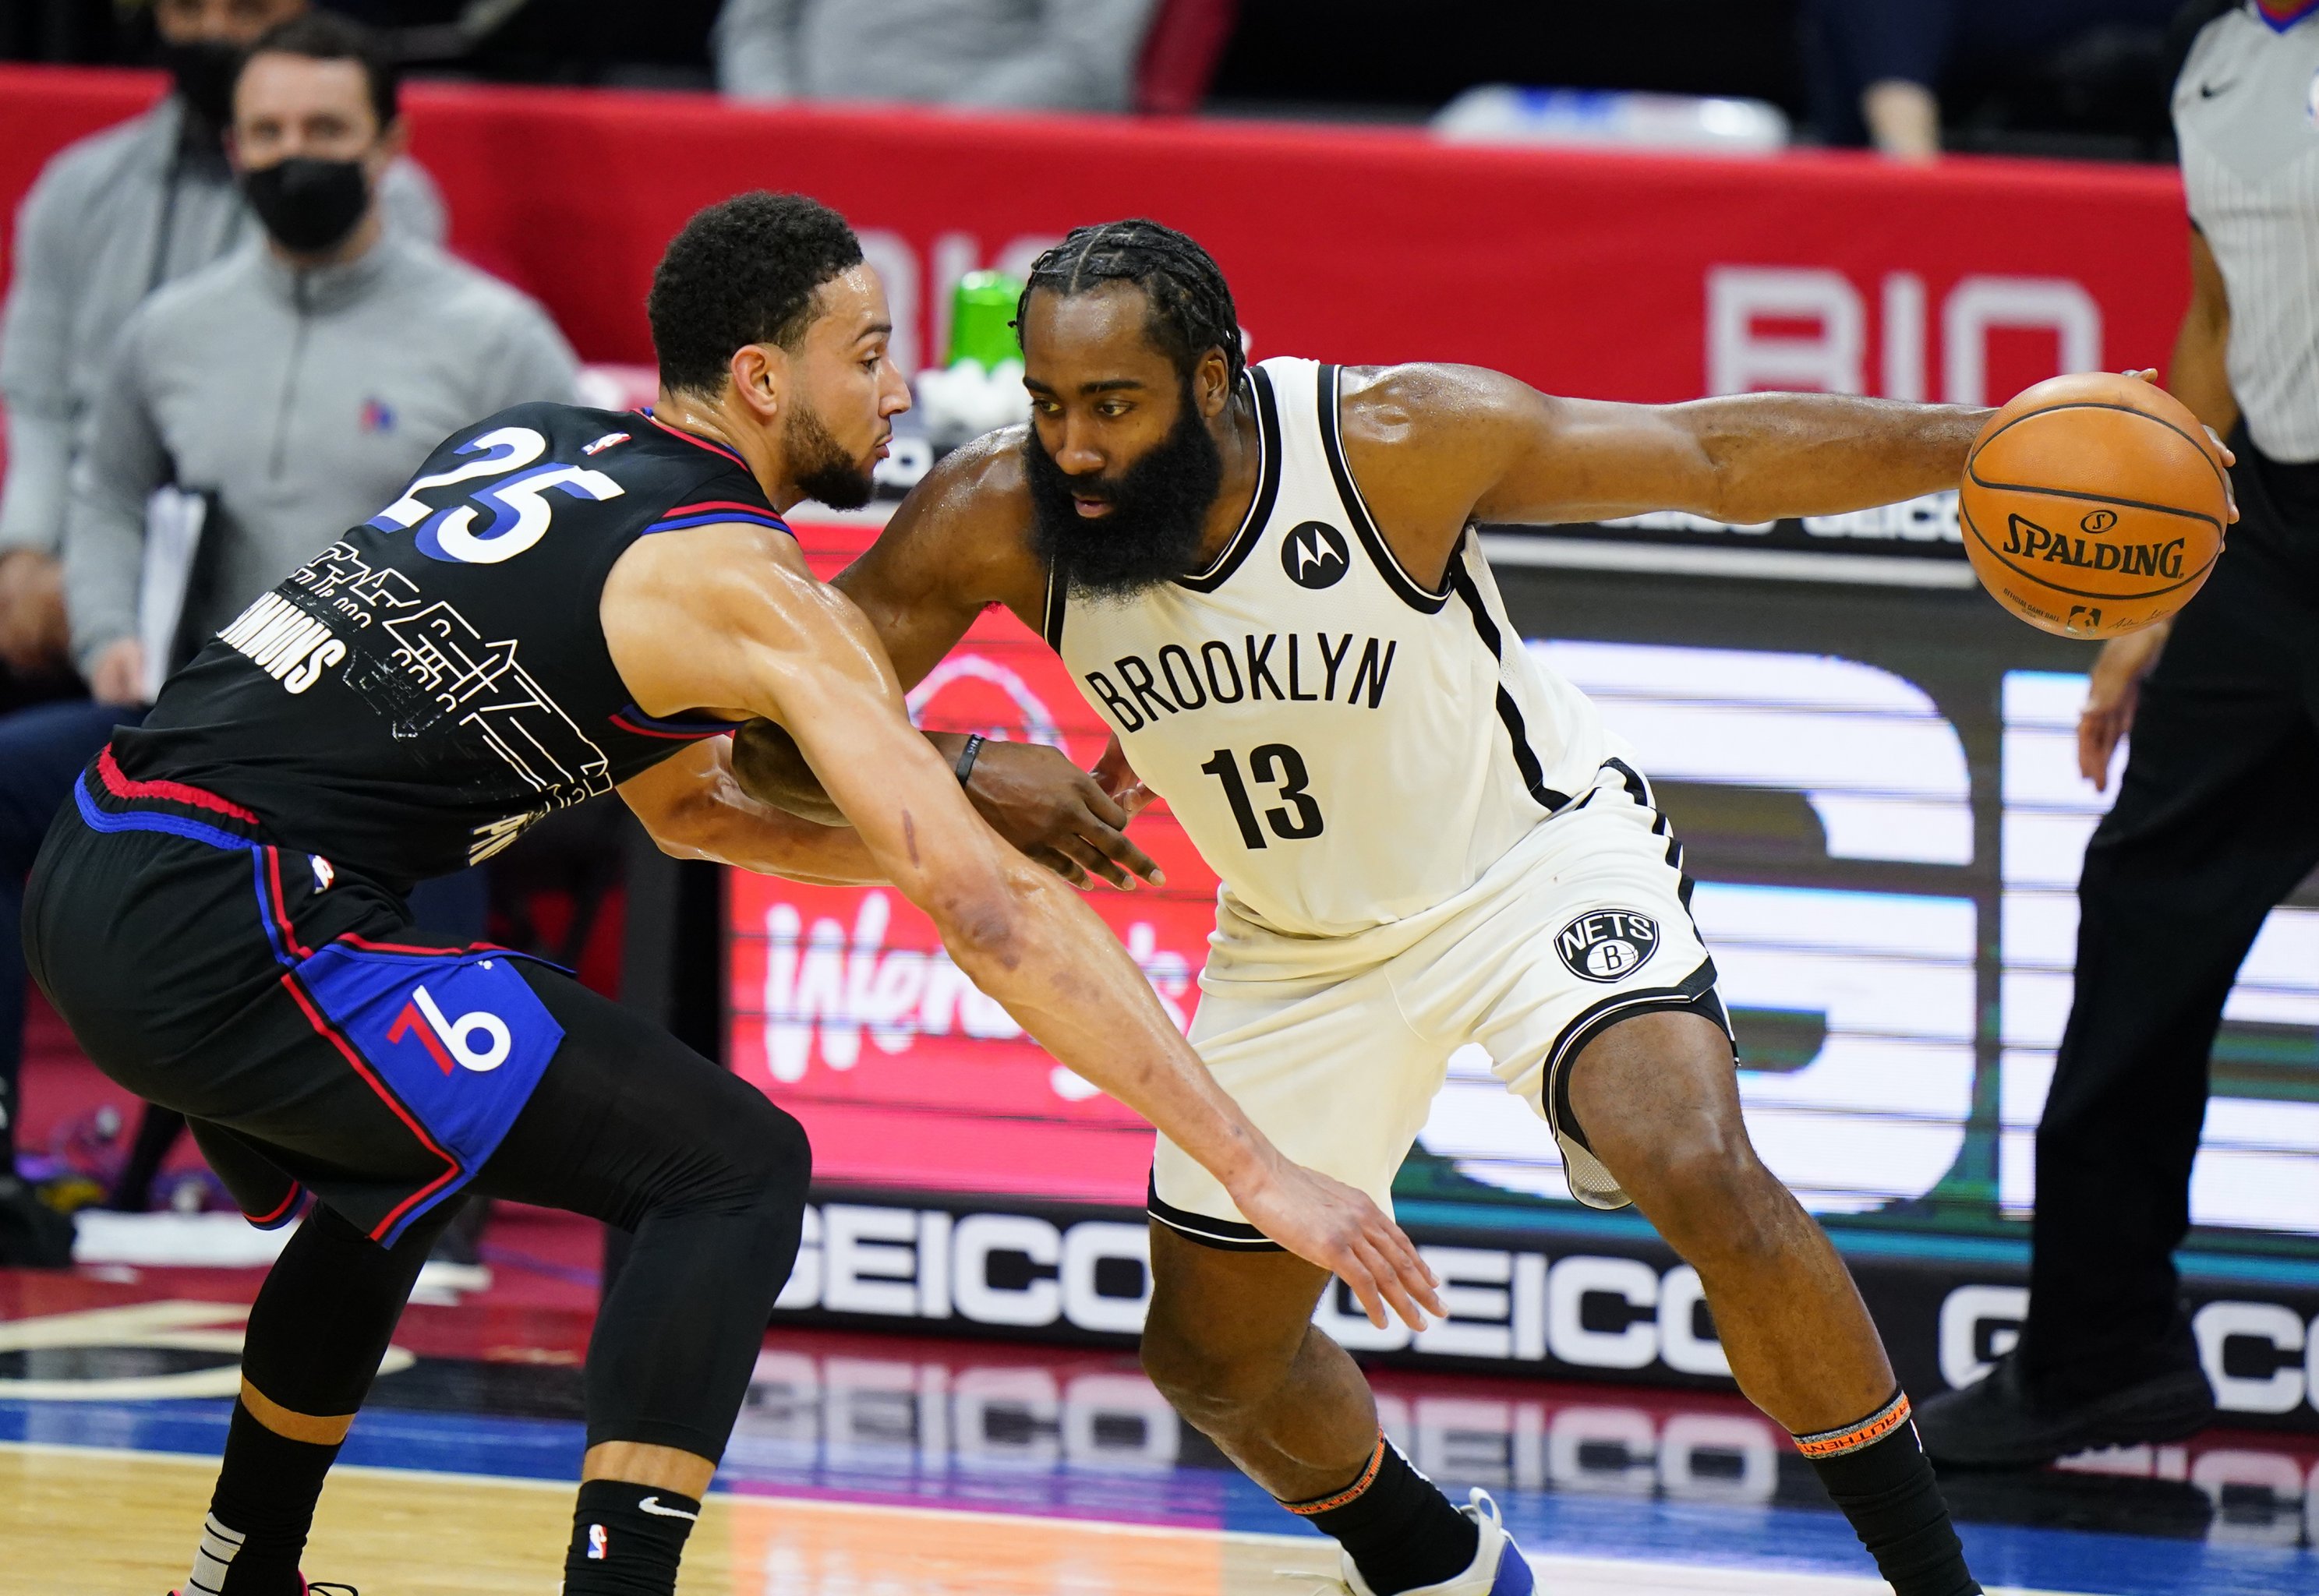 James Harden takes no responsibility for Sixers fallout: 'It's